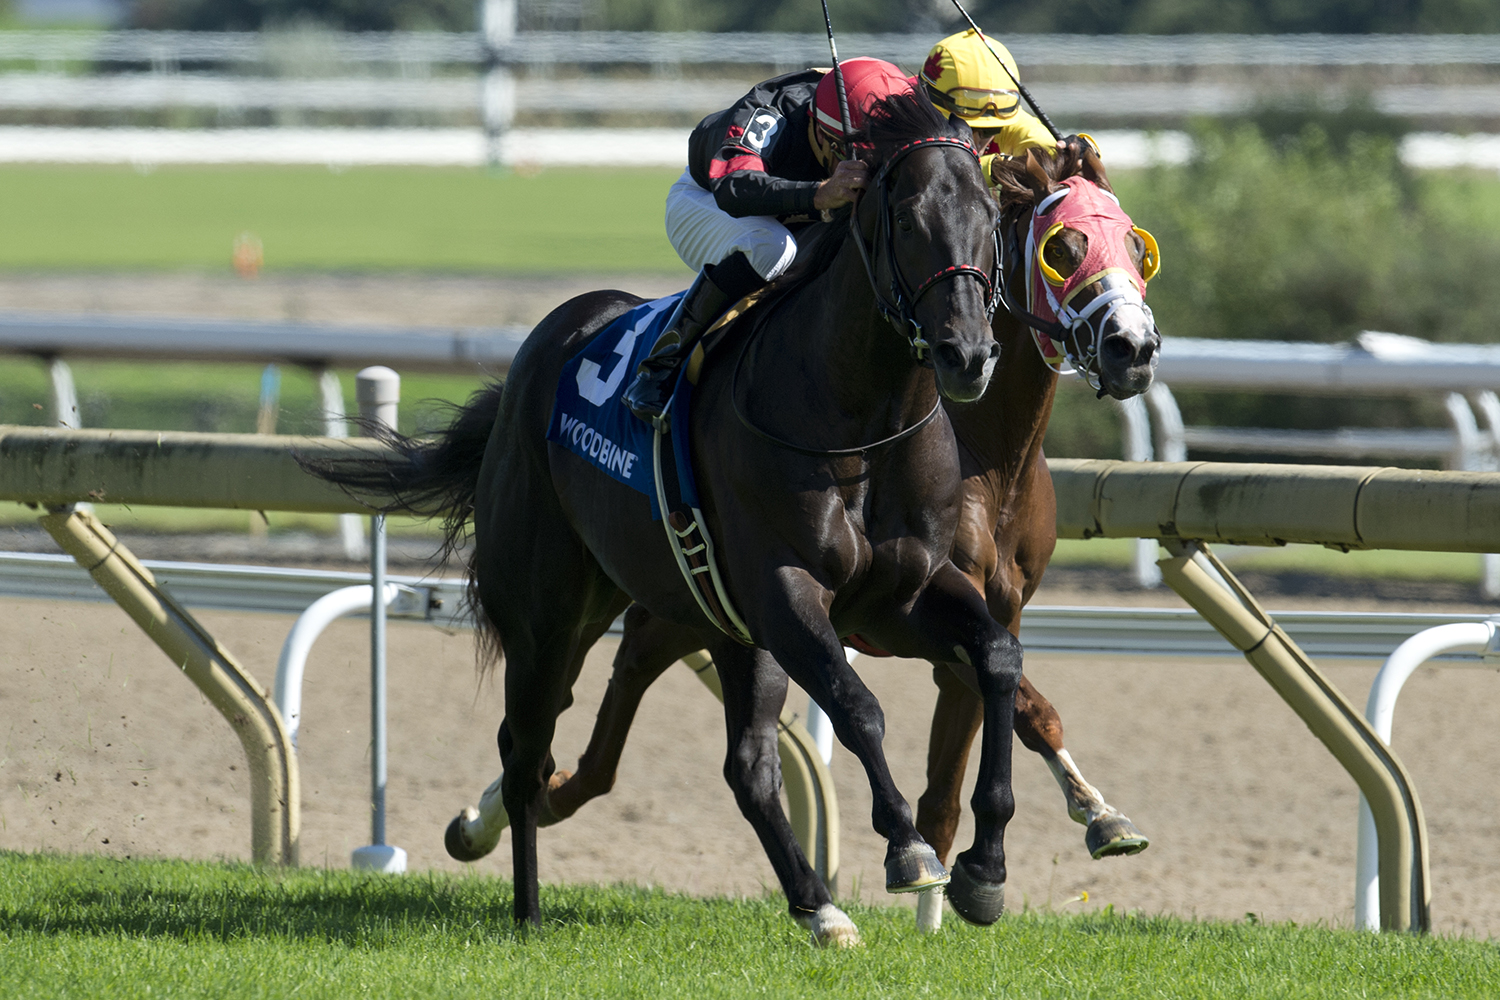 Silent Poet and jockey Gary Boulanger winning the 2018 Vice Regent Stakes at Woodbine Racetrack.